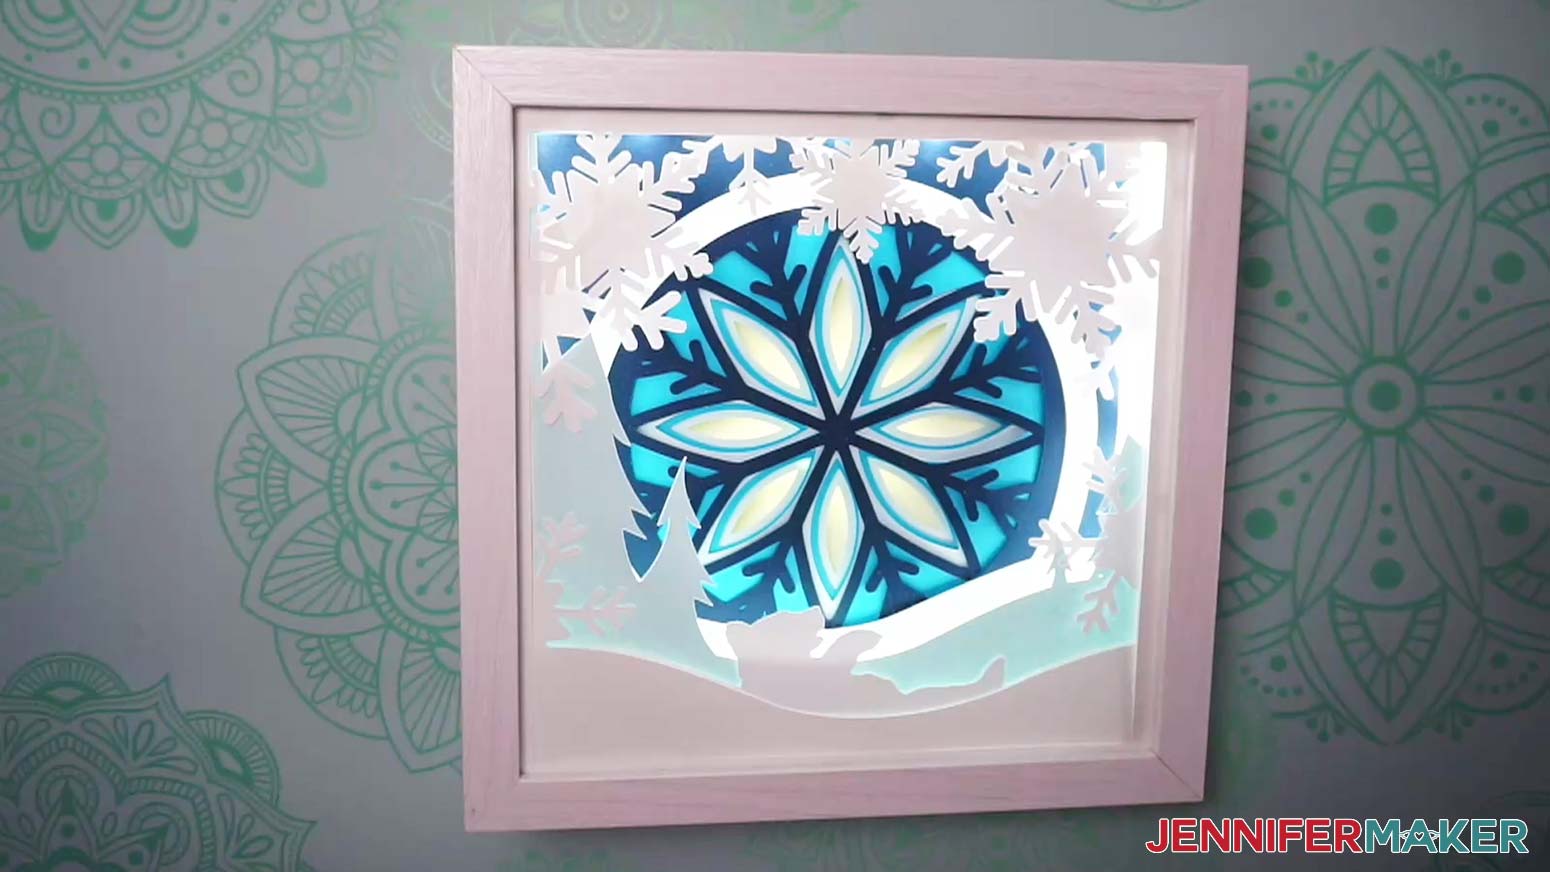 how to light up a shadow box with a winter scene and cute polar bear